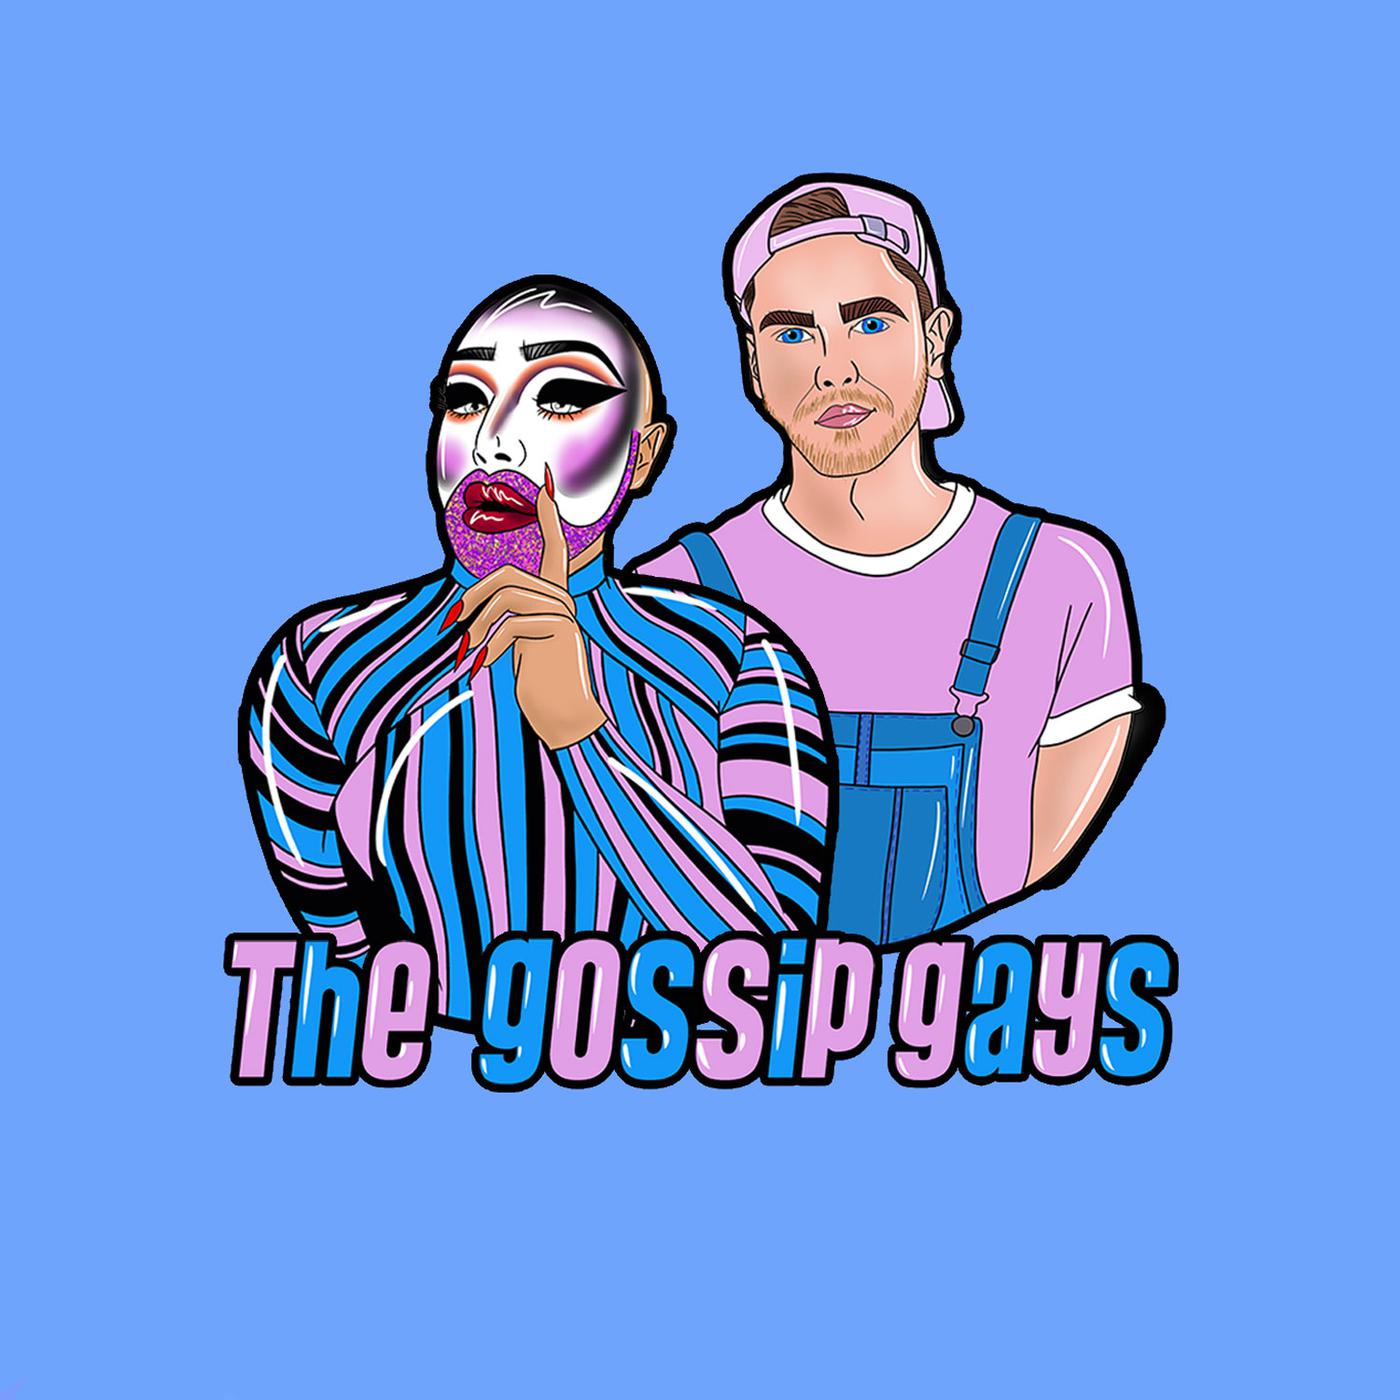 The Gossip Gays – The One With Veganuary